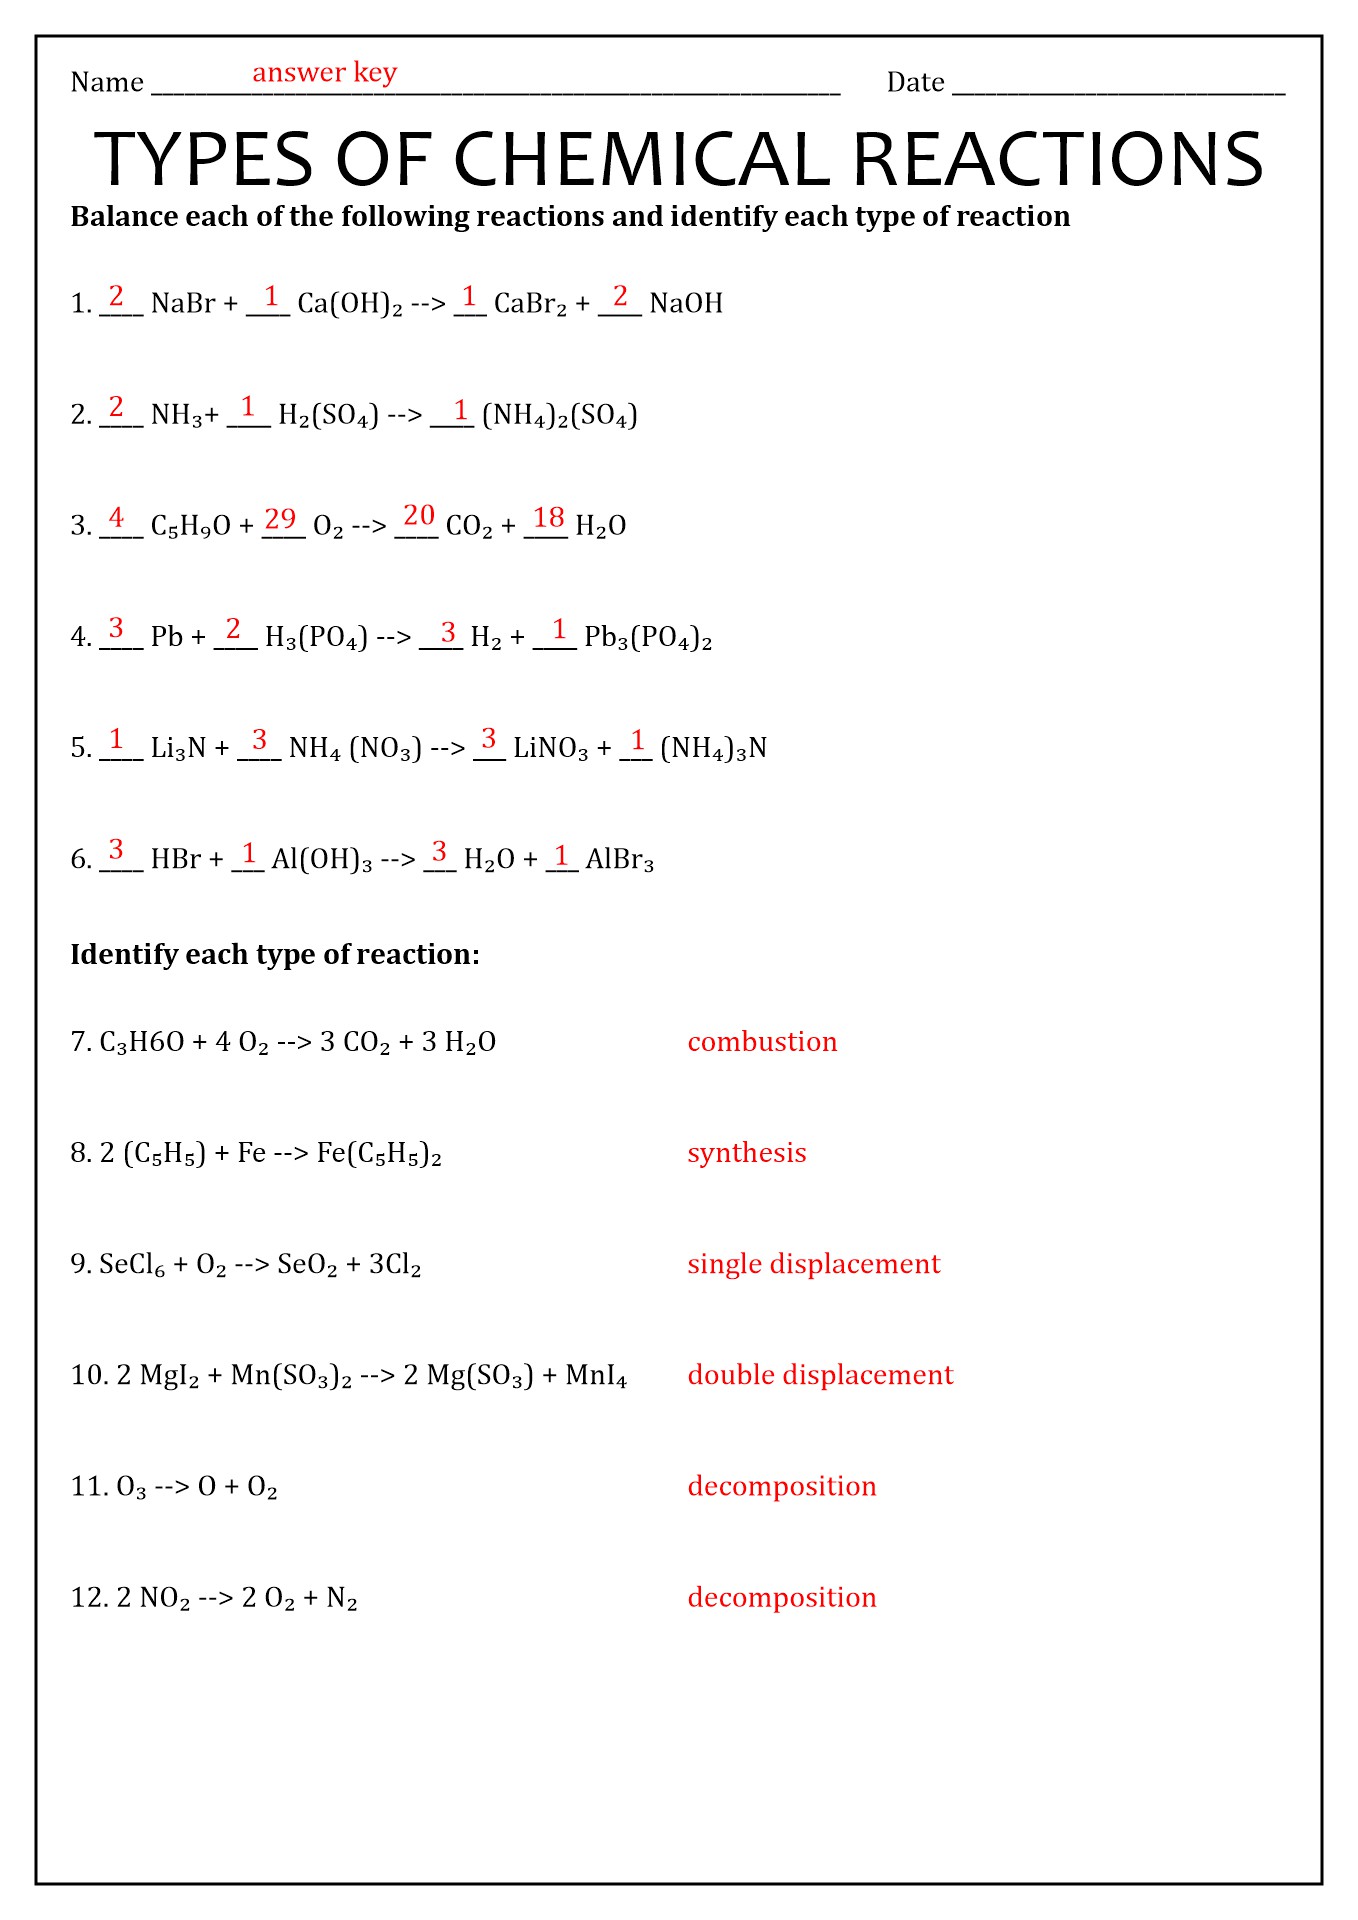 16-types-chemical-reactions-worksheets-answers-free-pdf-at-worksheeto